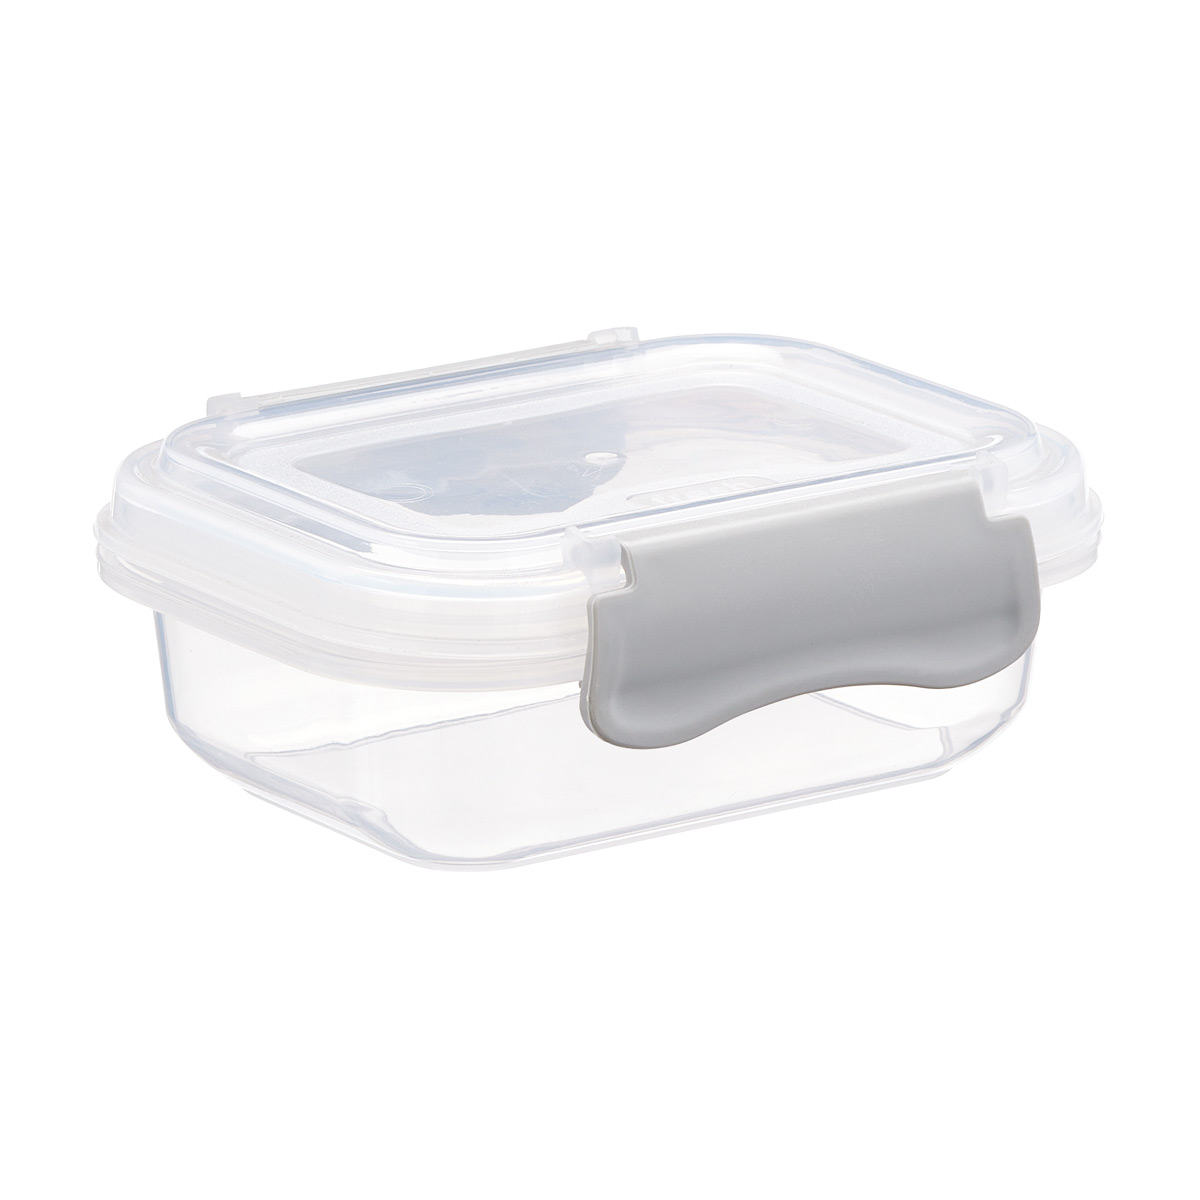 The Container Store 6.8 oz. Plastic Food Container Grey